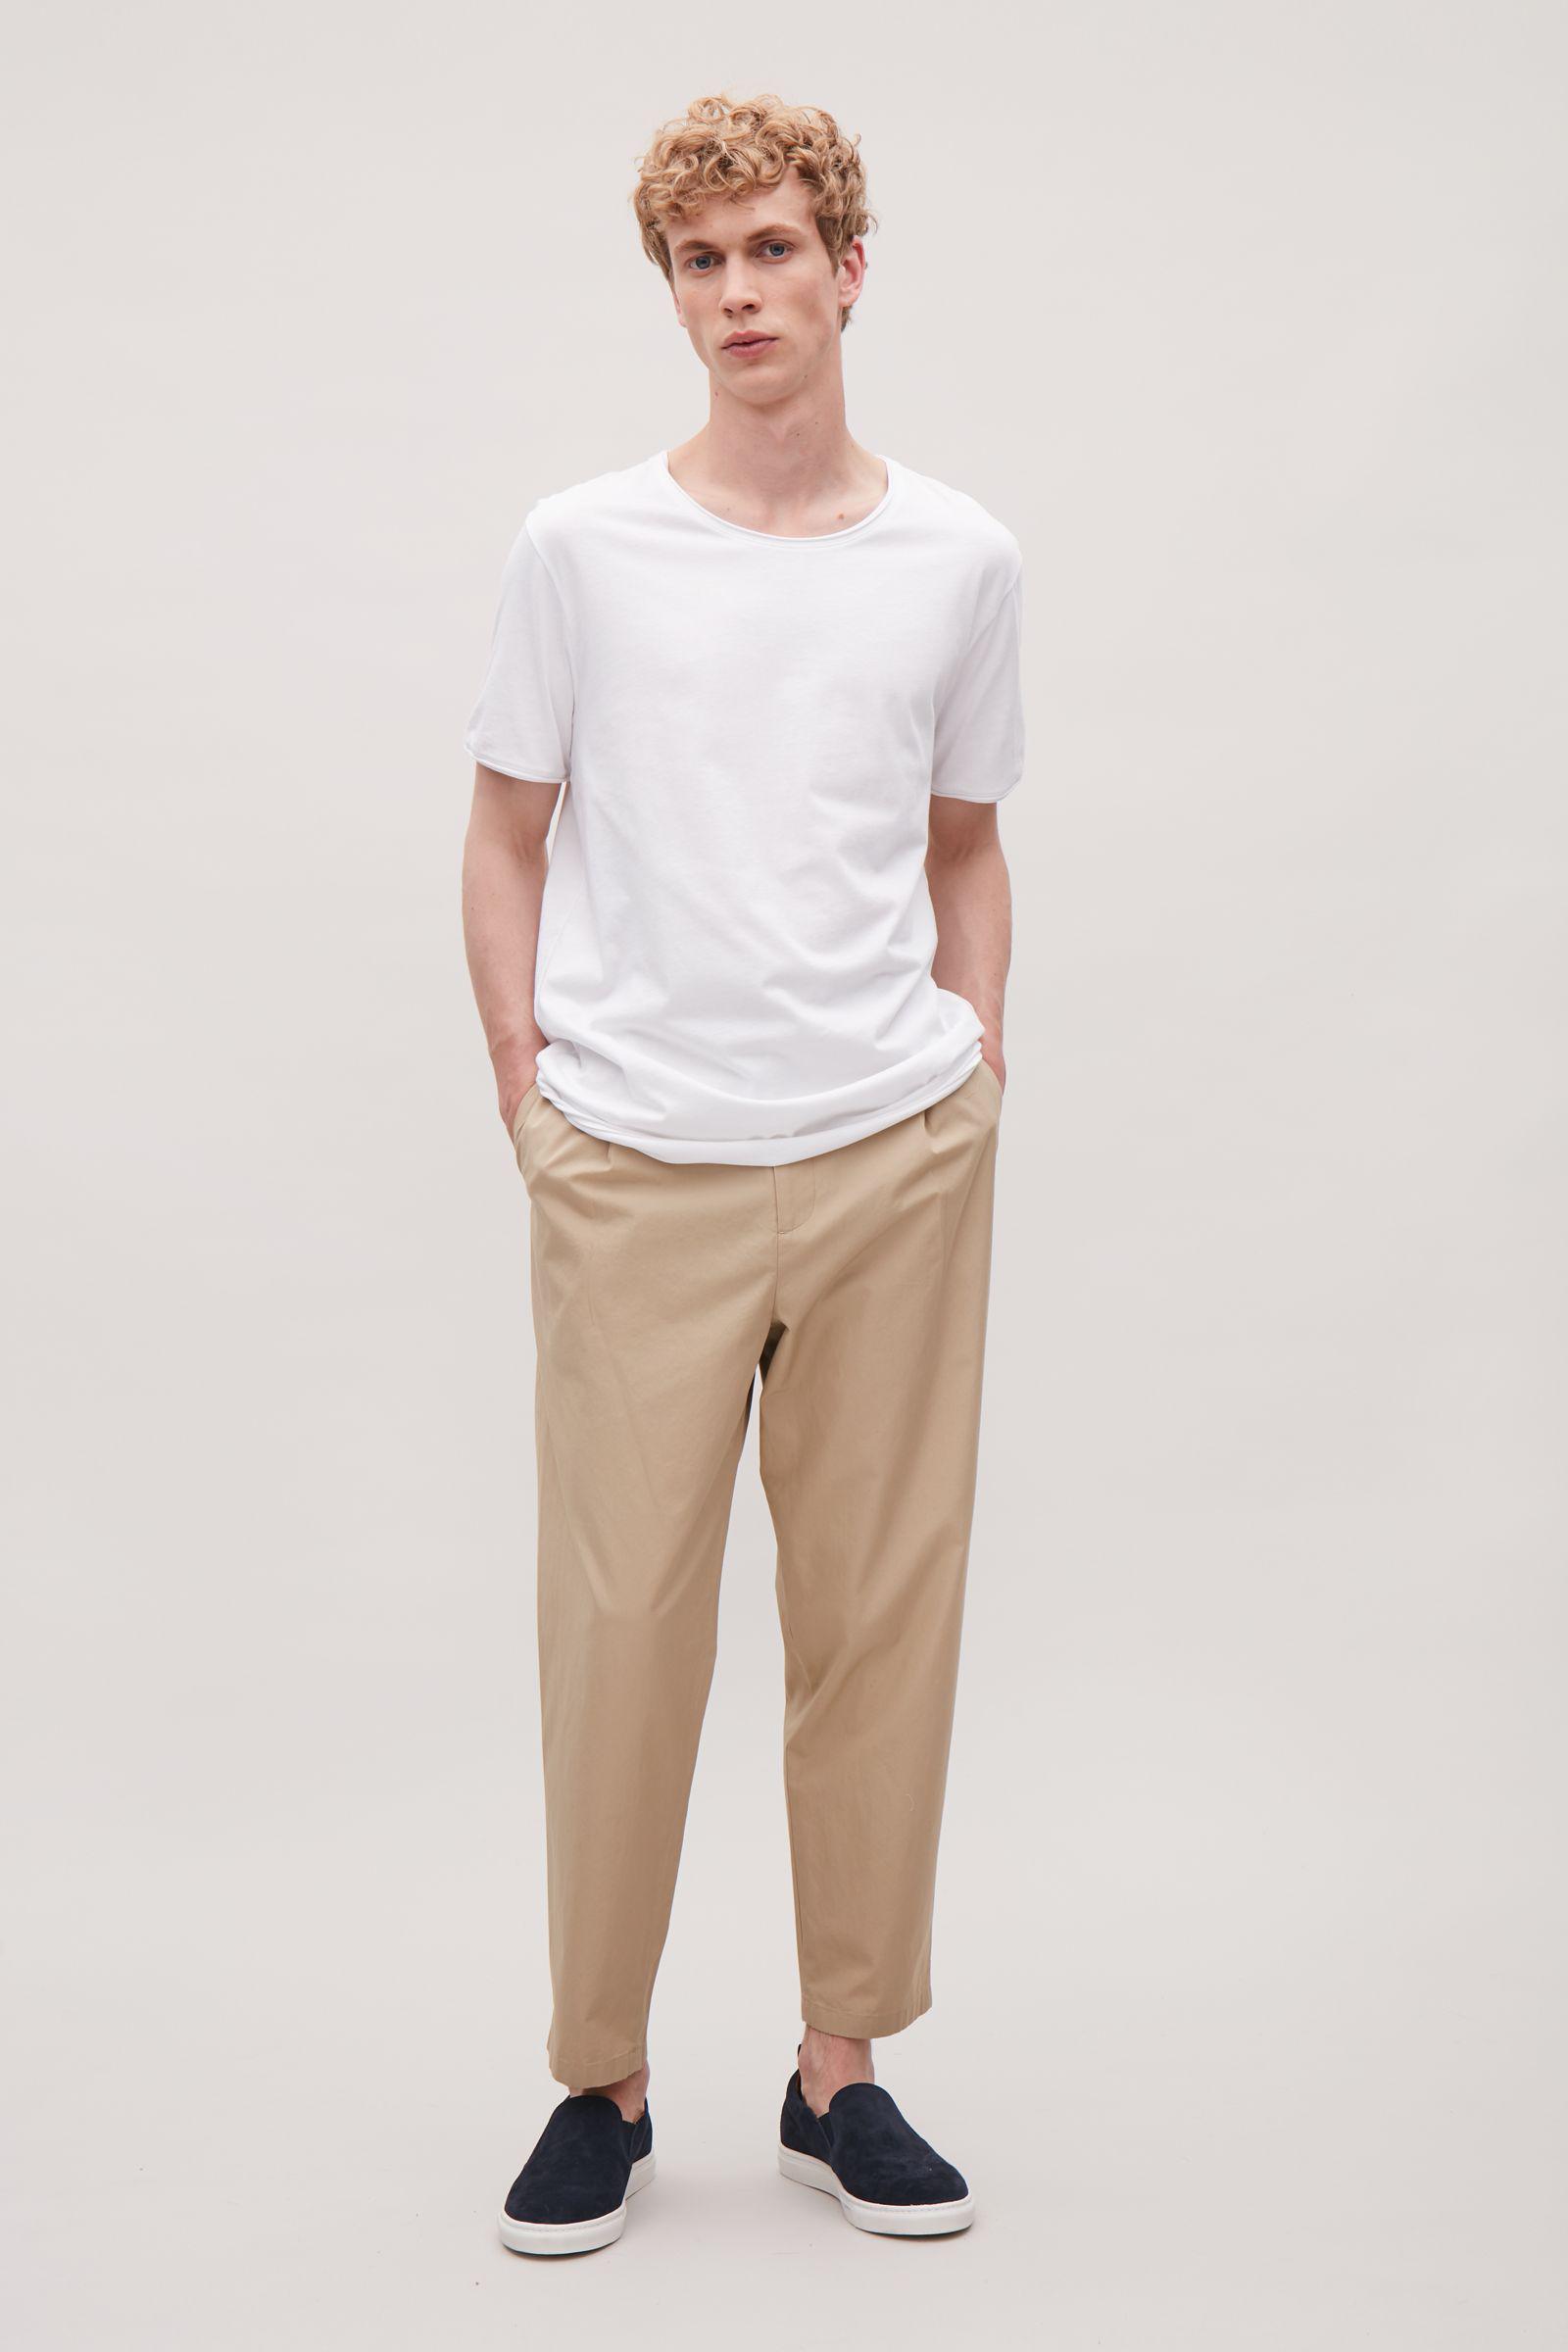 COS Rolled Edge T-shirt in White for Men | Lyst